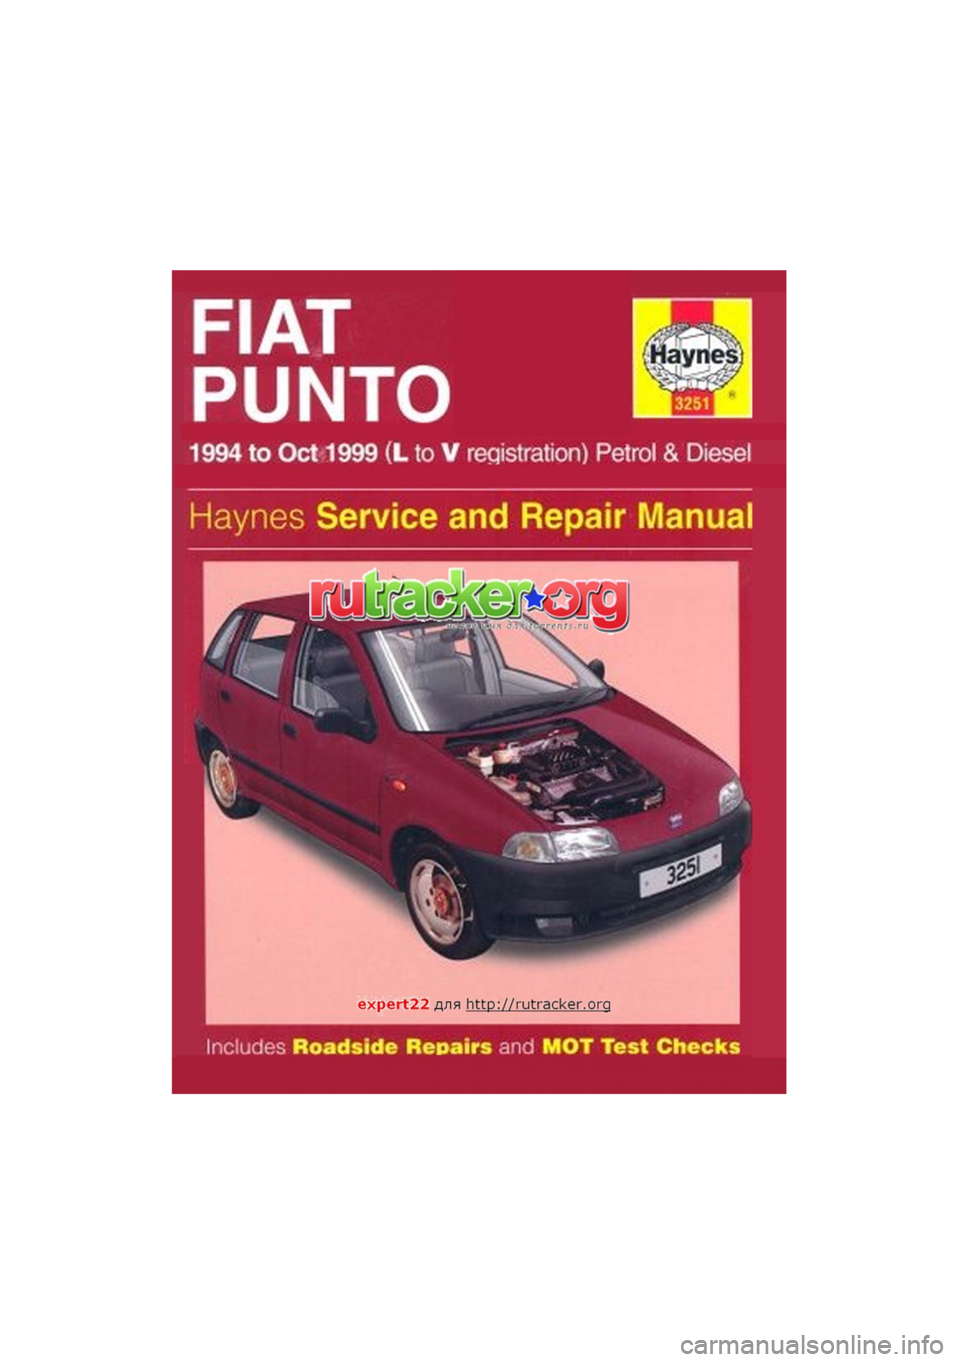 FIAT PUNTO 1995 176 / 1.G Workshop Manual 
FIAT 
PUNTO 
1994 to Oct 1999 (L to V registration) Petrol & Diesel 
Haynes Service and Repair Manual 
expert22 fl/ia http://rutracker.org 
Includes Roadside Repairs and MOT Test Checks  